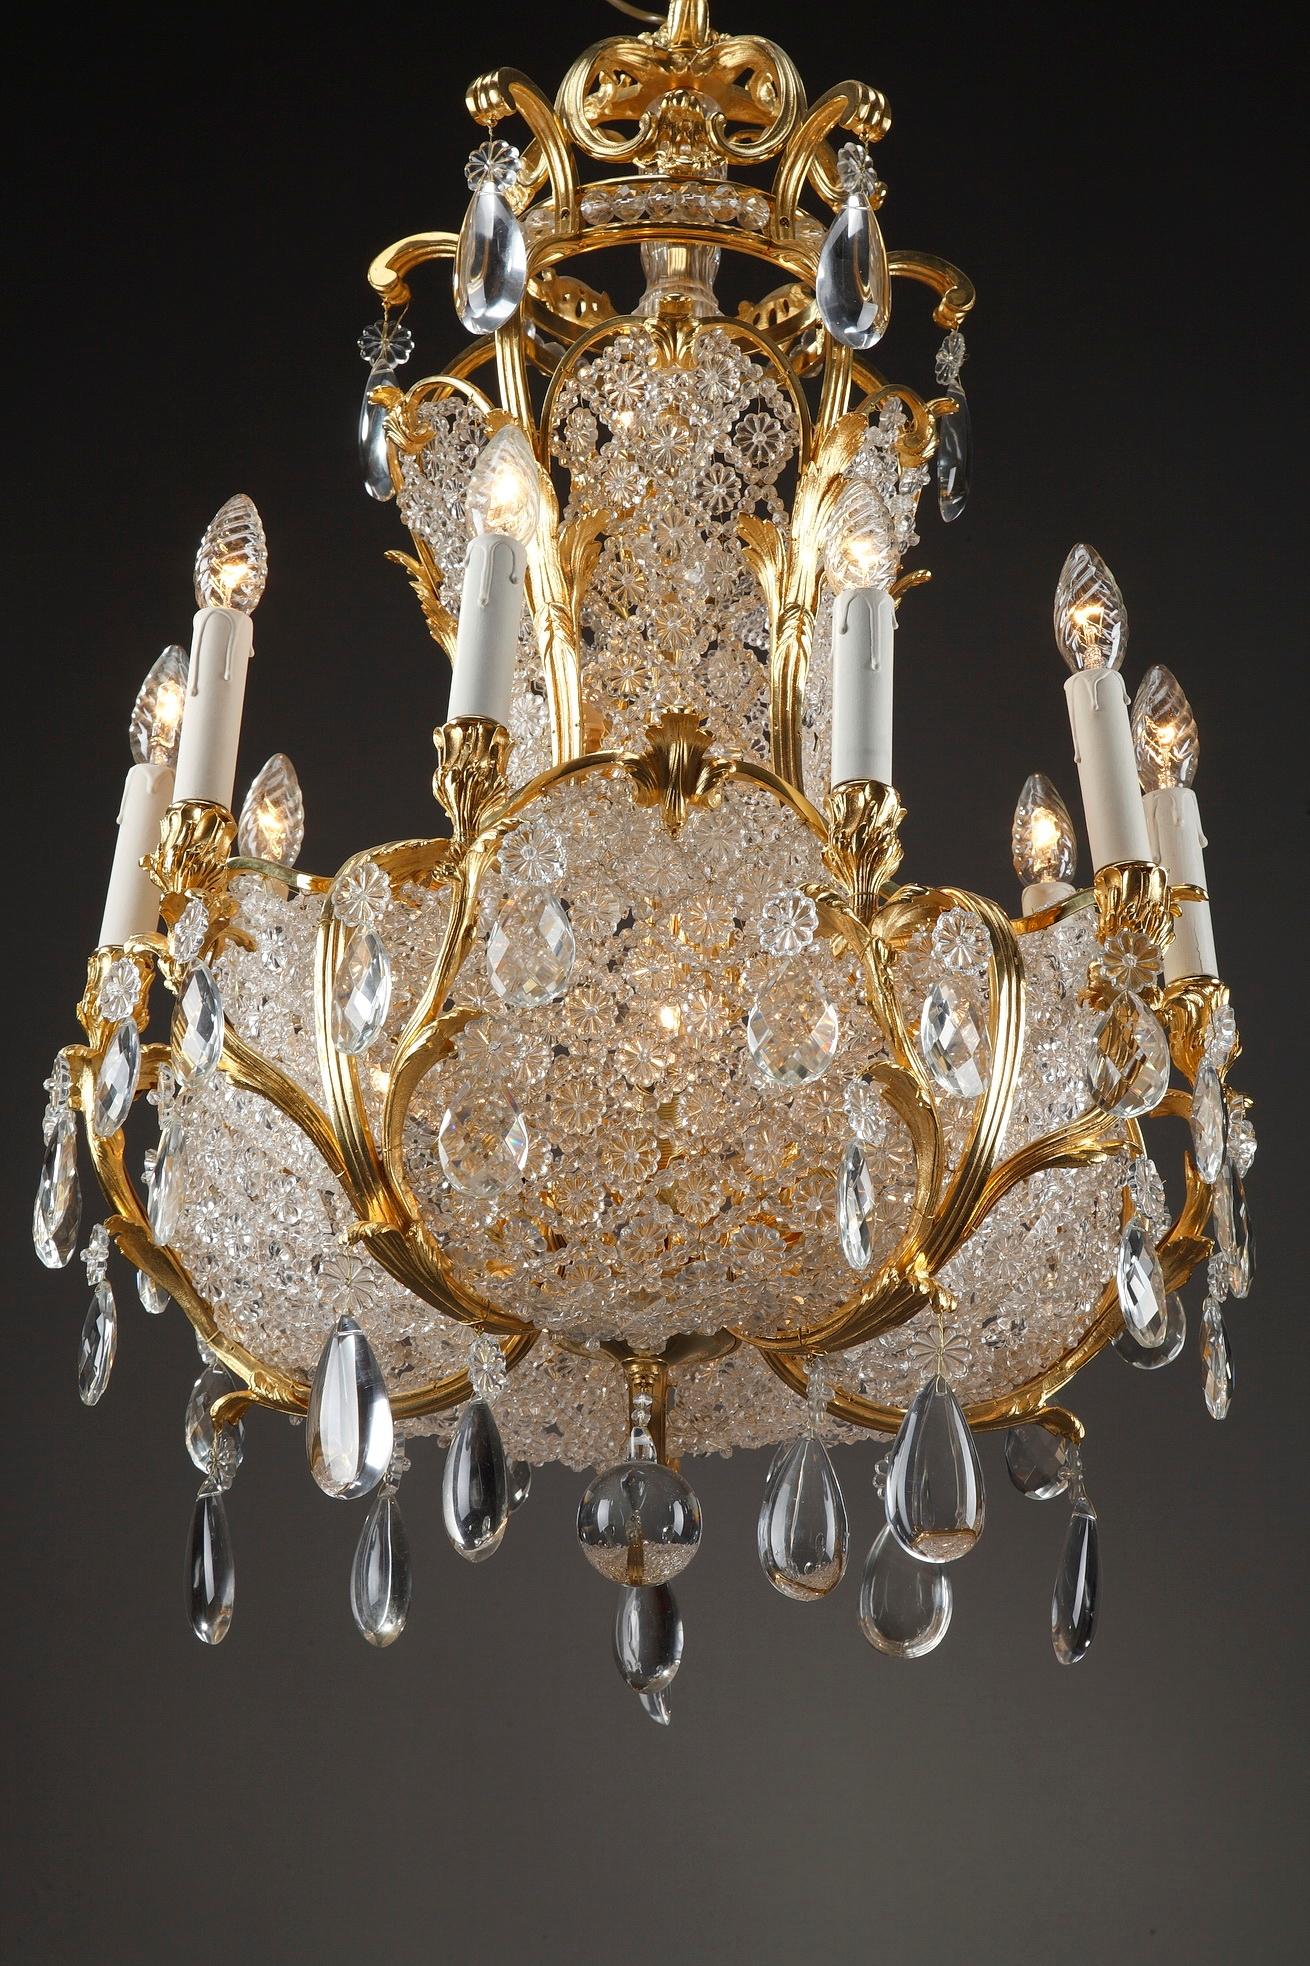 19th Century 10-Light Ormolu and Crystal Basket-Shaped Chandelier For Sale 3